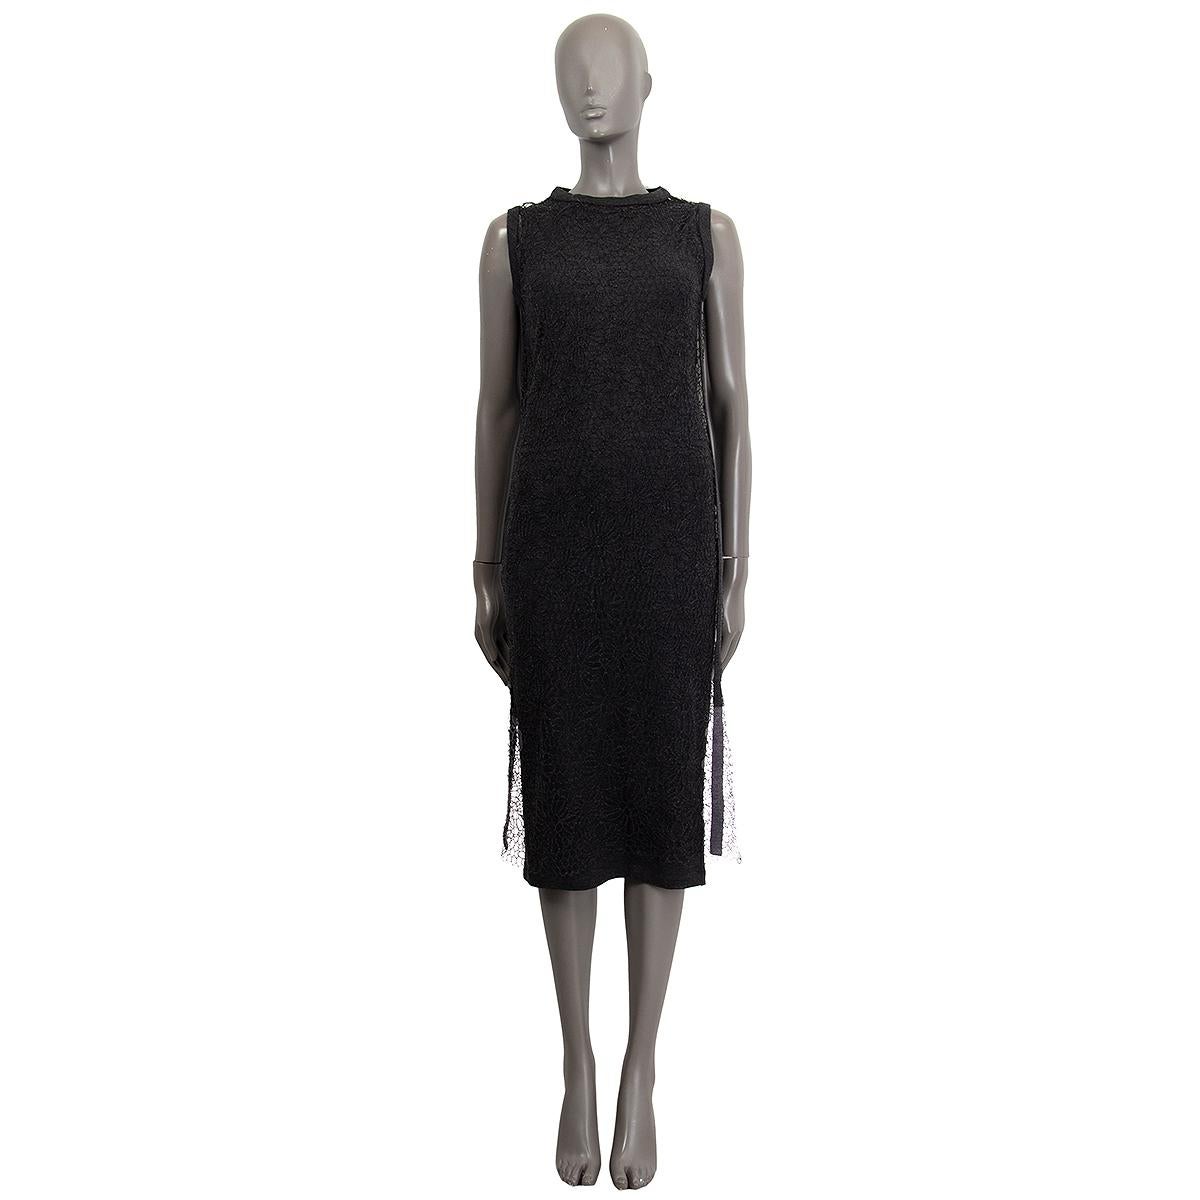 100% authentic Brunello Cucinelli sleeveless floral wire knit strech dress in dark grey wool (94%) and elastane (6%) with a round neck. Unlined. Has been worn and is in excellent condition. 

Measurements
Tag Size	S
Size	S
Shoulder Width	34cm